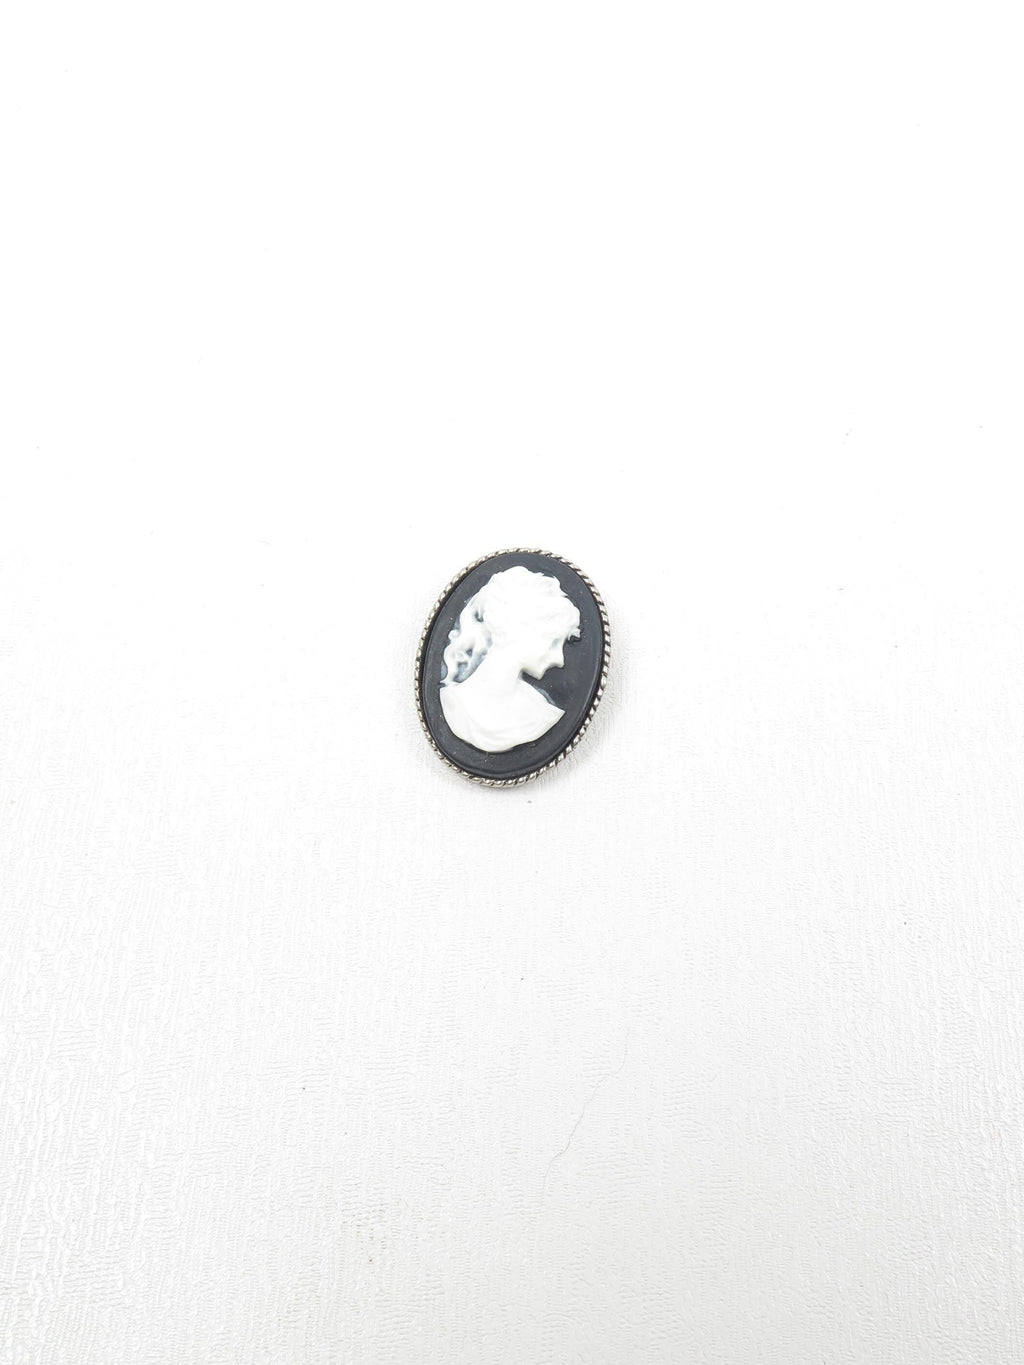 Black & White Vintage Style Cameo Brooch - The Harlequin